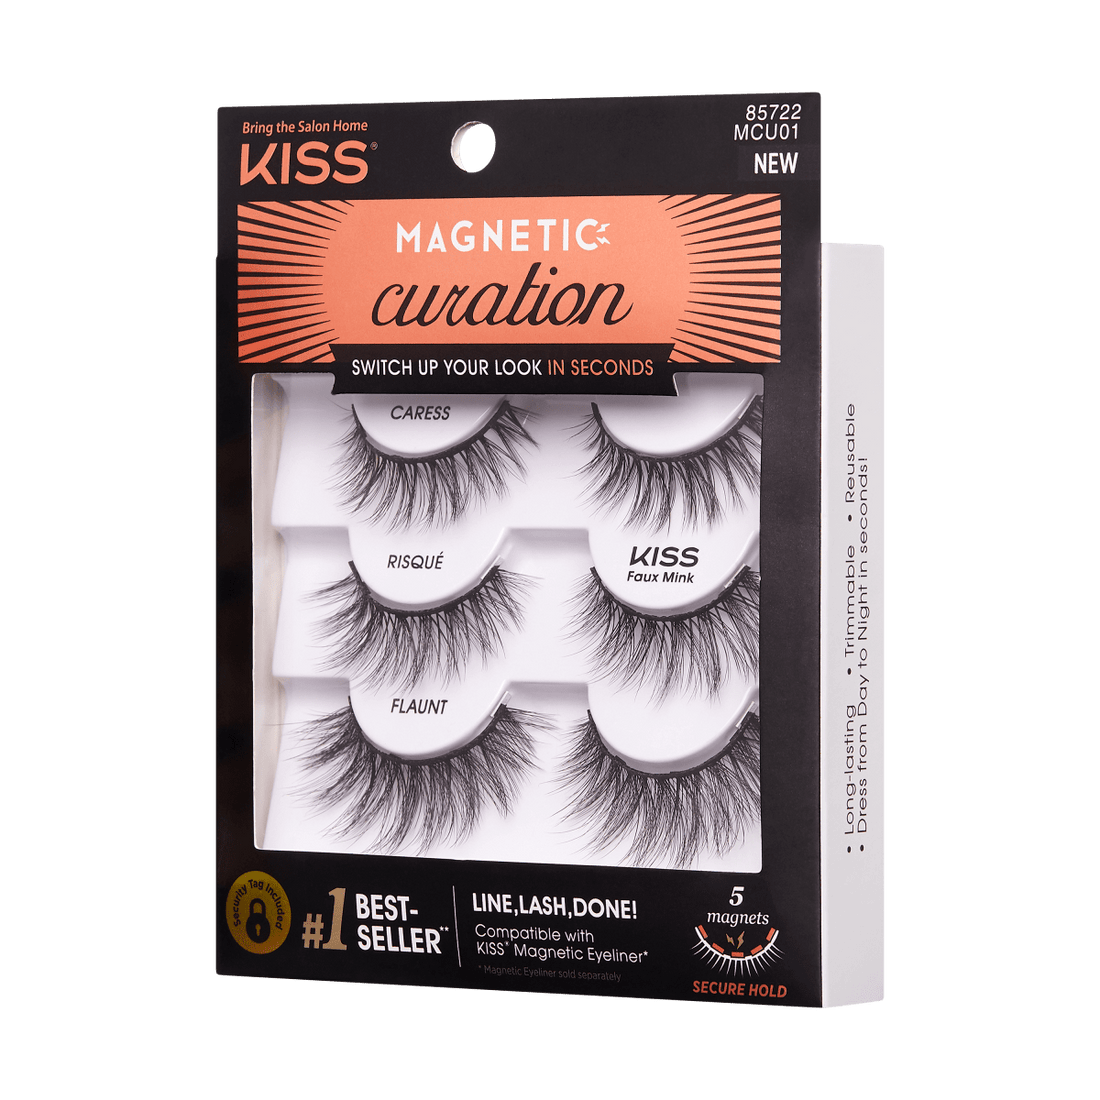 A pack of magnetic lashes. The KISS Magnetic Curation Kit includes 3 lash styles.